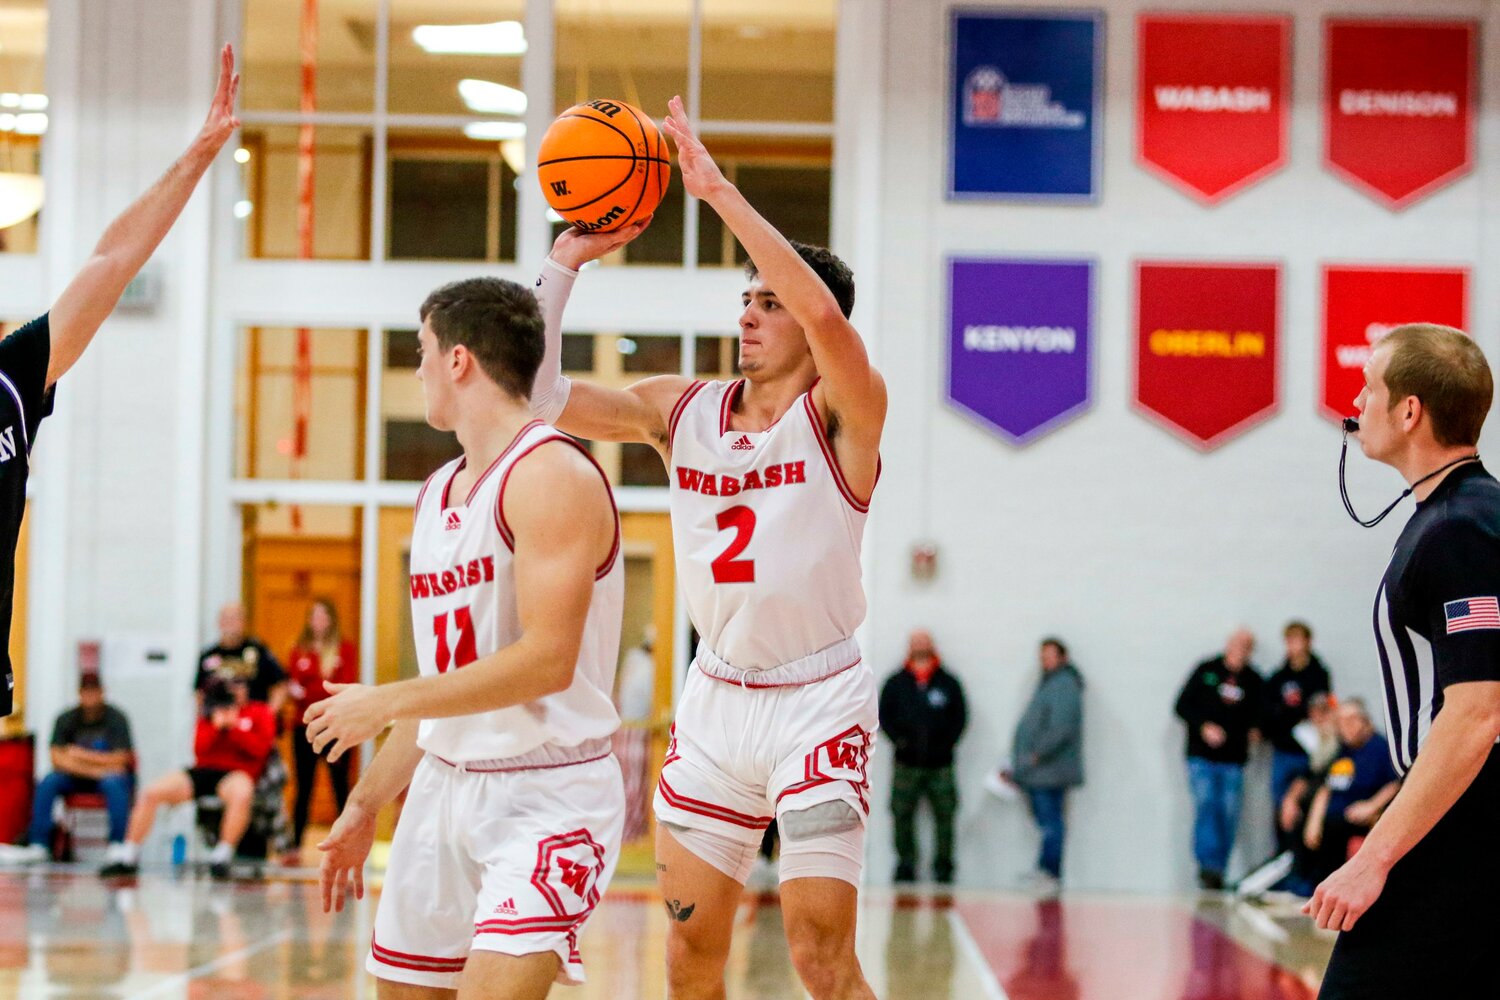 Junior guard Vinny Buccilla tied his career high with 26 points to lead Wabash to a 76-50 win over Kenyon on Wednesday night.